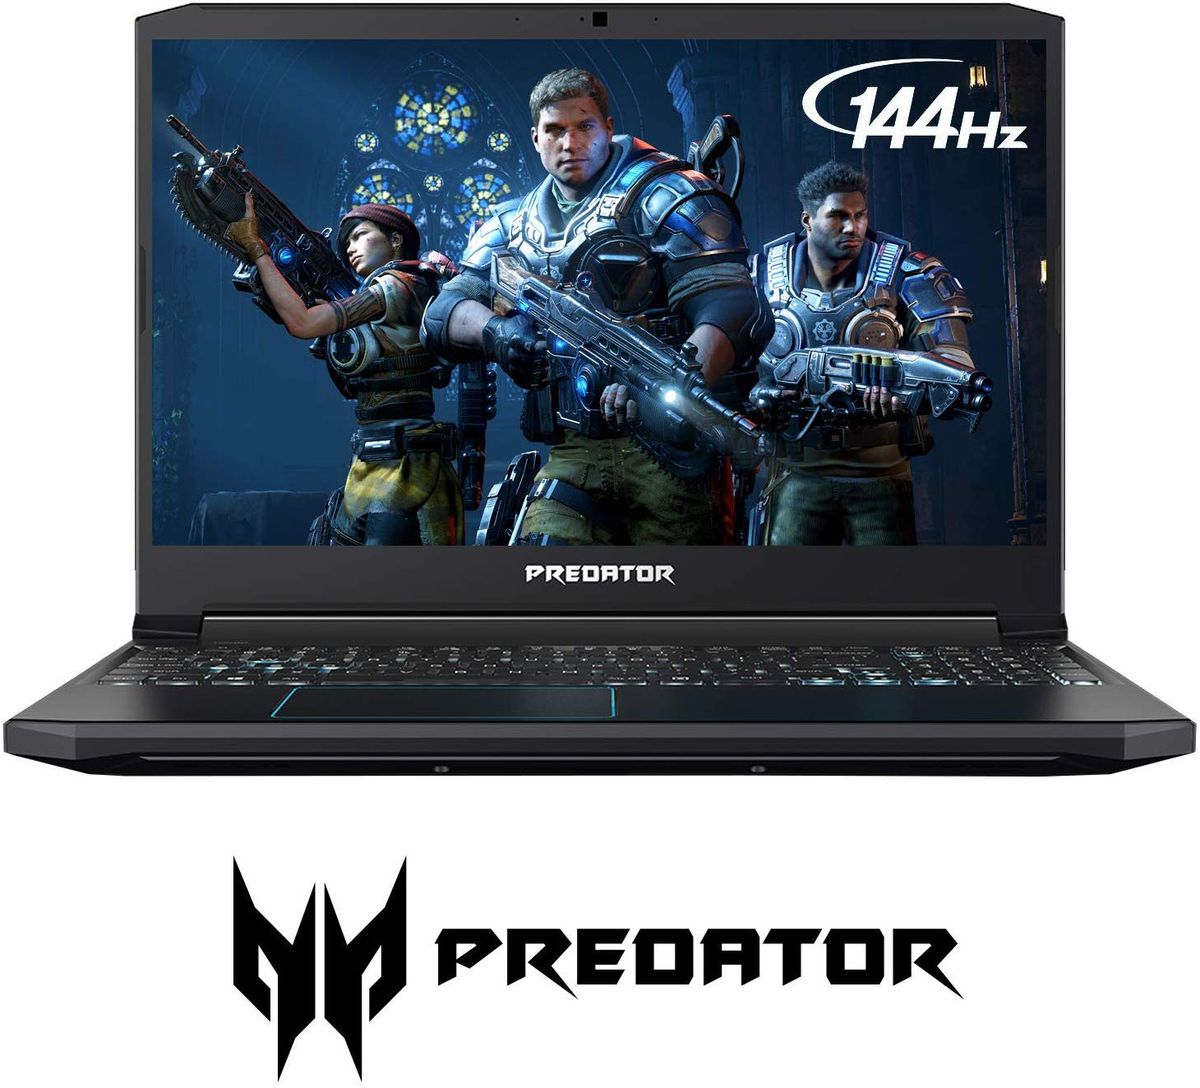 Acer S Predator Helios 300 Gaming Laptop Is On Sale For Cyber Monday Laptop Mag